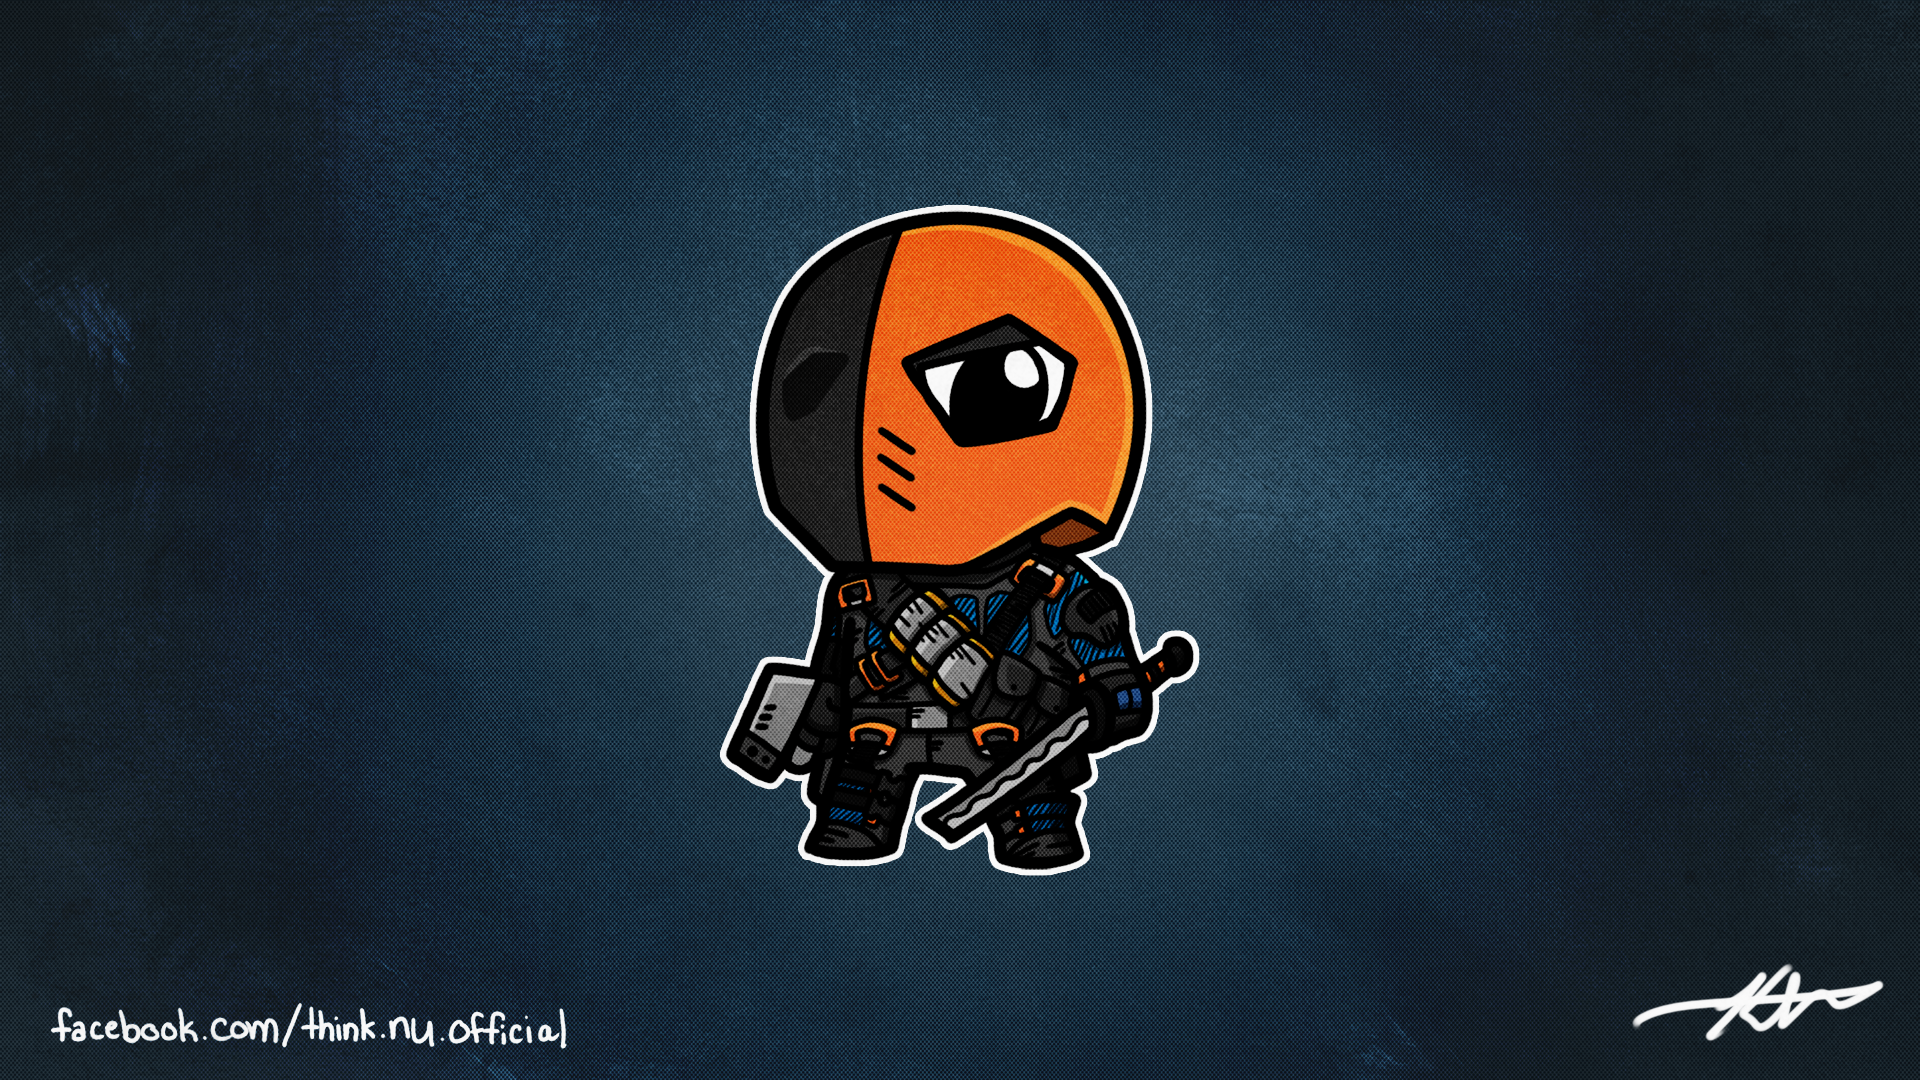 Deathstroke Wallpapers Hd Group 78 Find the best masks wallpapers on wallpapertag. deathstroke wallpapers hd group 78